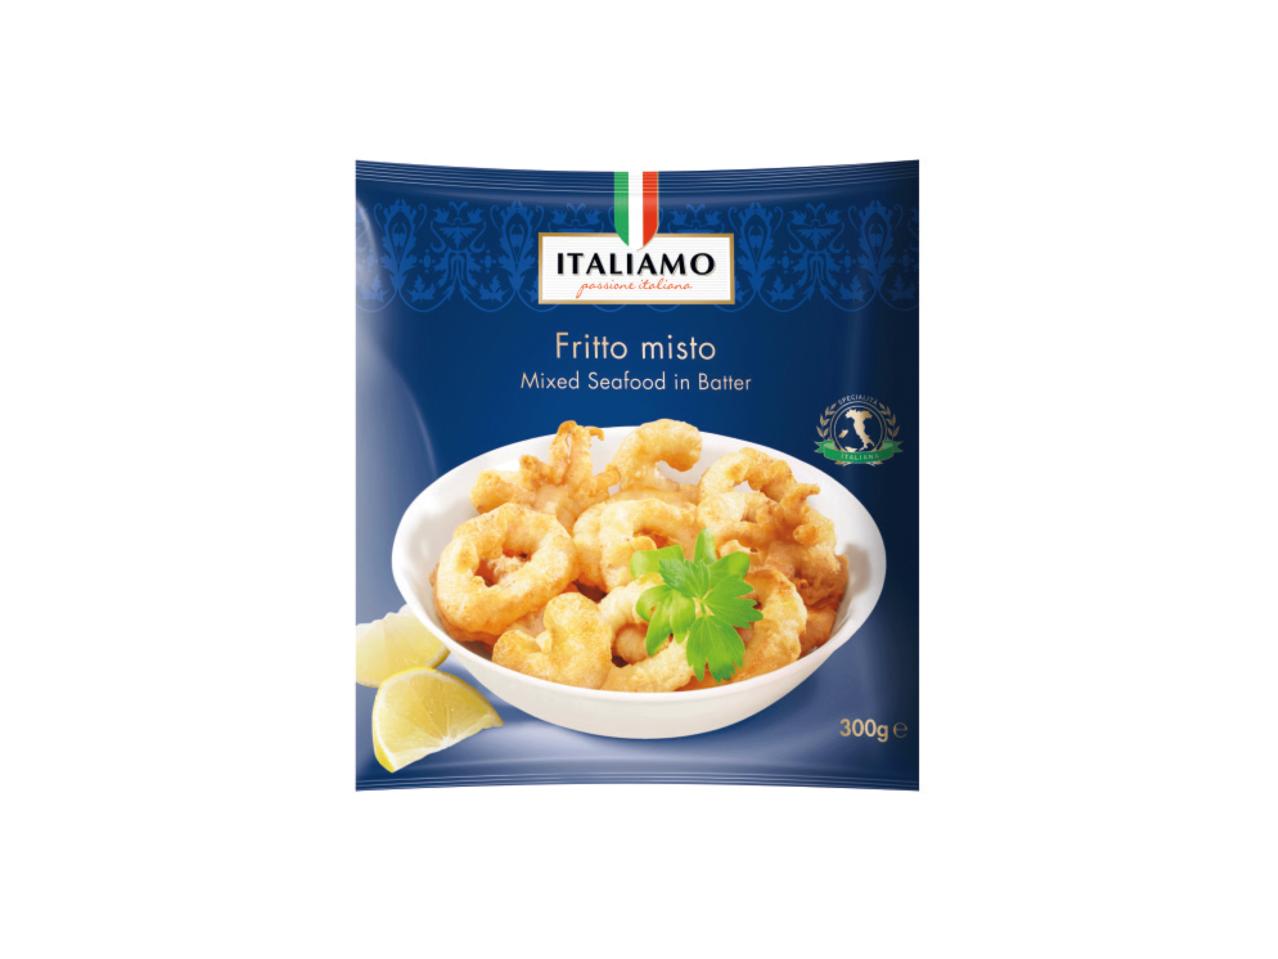 ITALIAMO Mixed Seafood in Batter